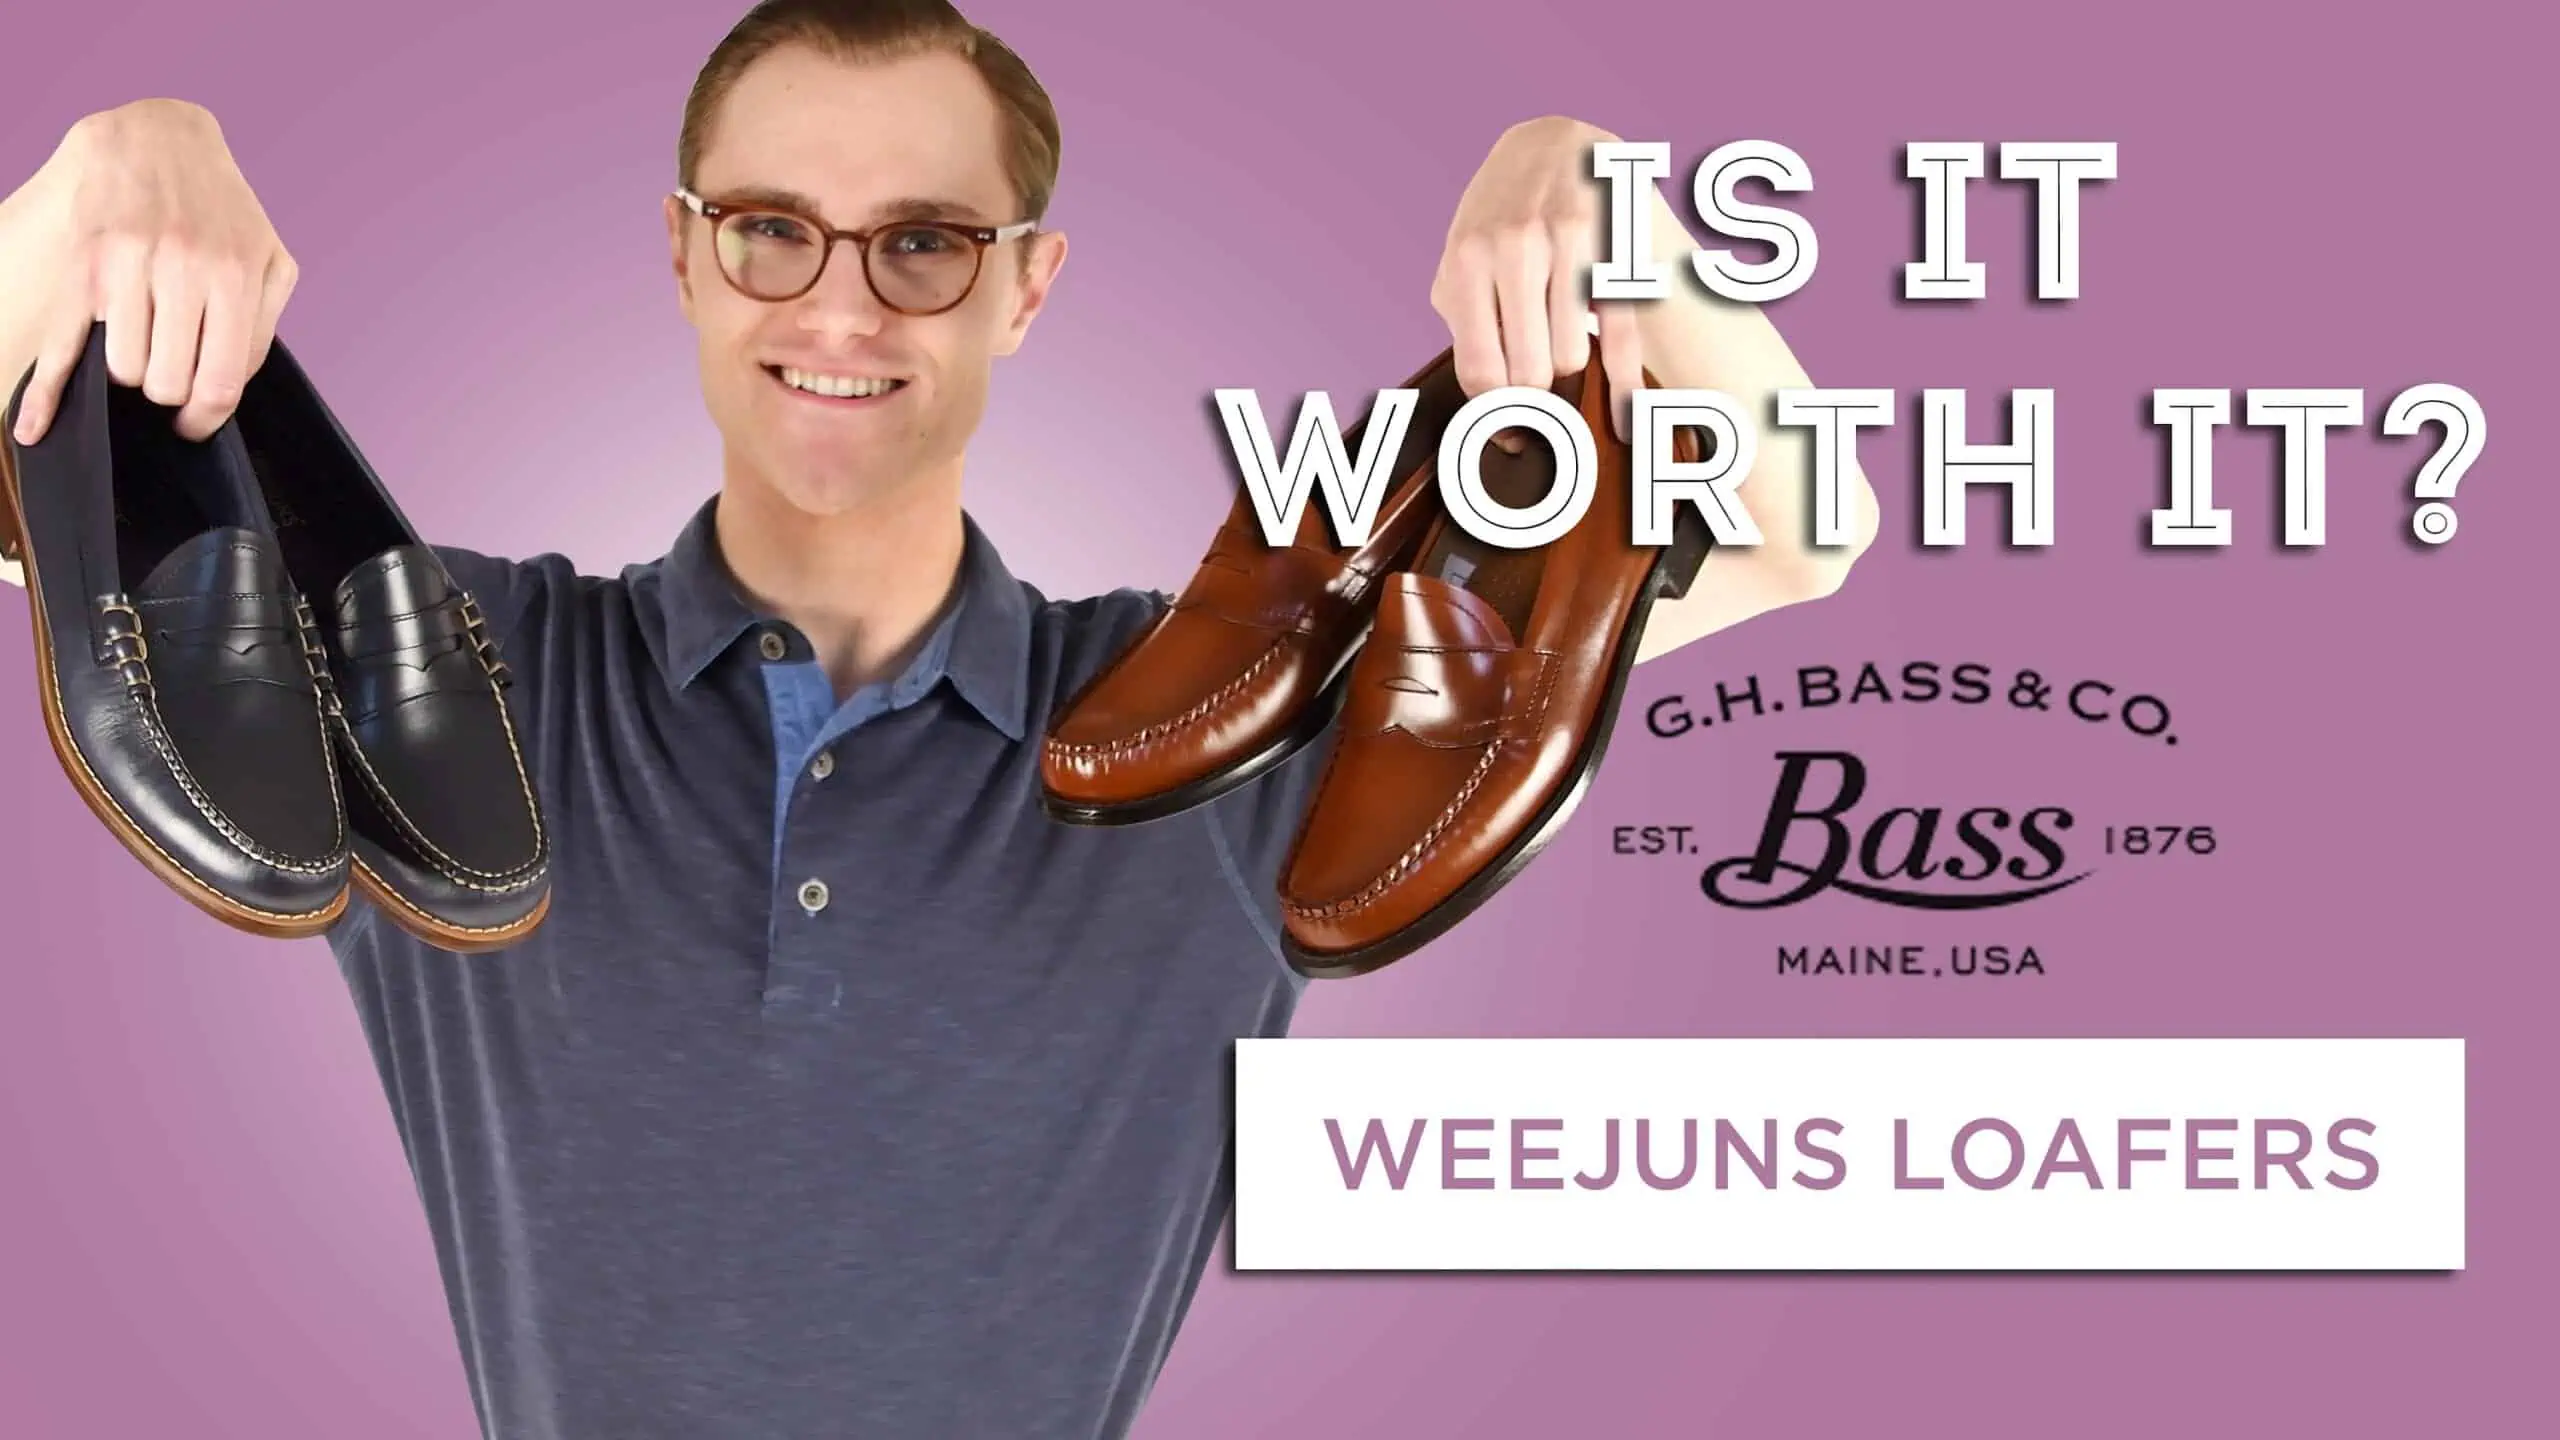 Bass "Weejuns" Loafers: Is It Worth It? - Trad Loafer Review